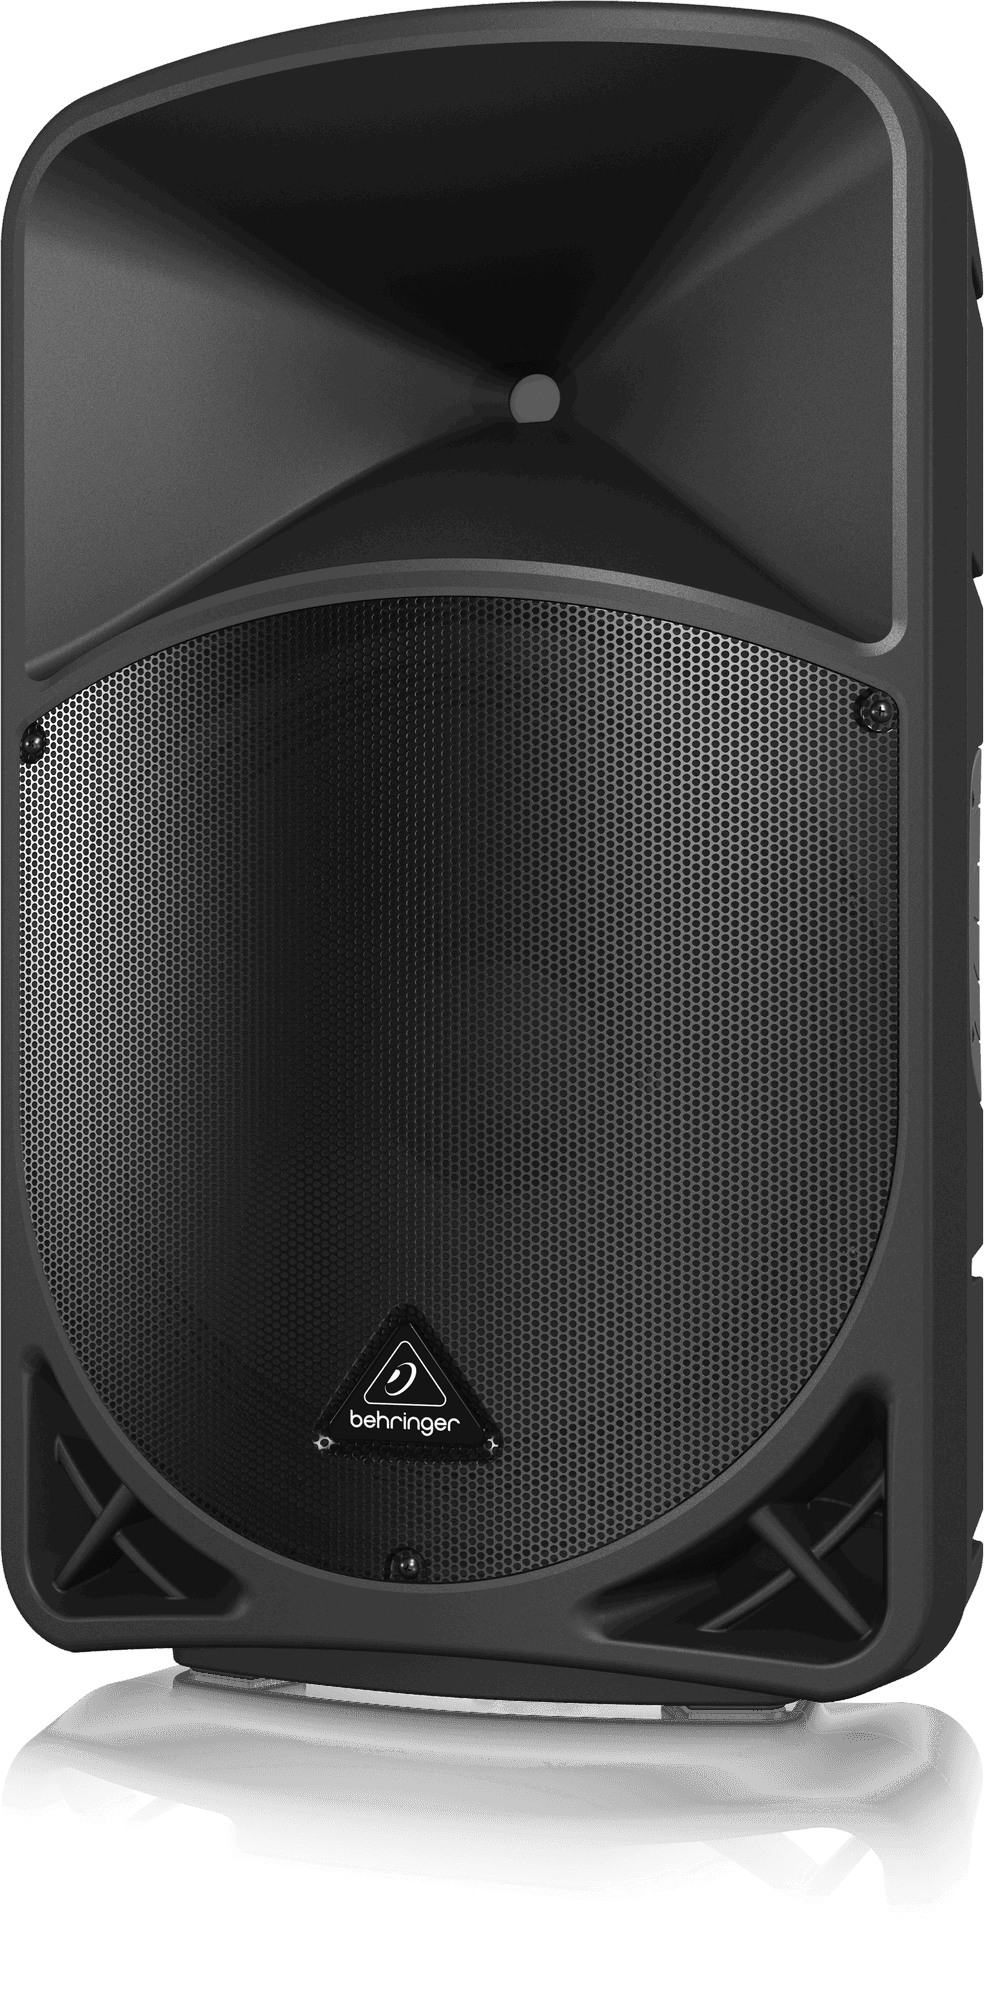 Behringer B15X 1000 Watt 2 Way 15" Powered Loudspeaker with Digital Mixer, Wireless Option, Remote Control via iOS*/Android* Mobile App and Bluetooth Audio Streaming | BEHRINGER , Zoso Music